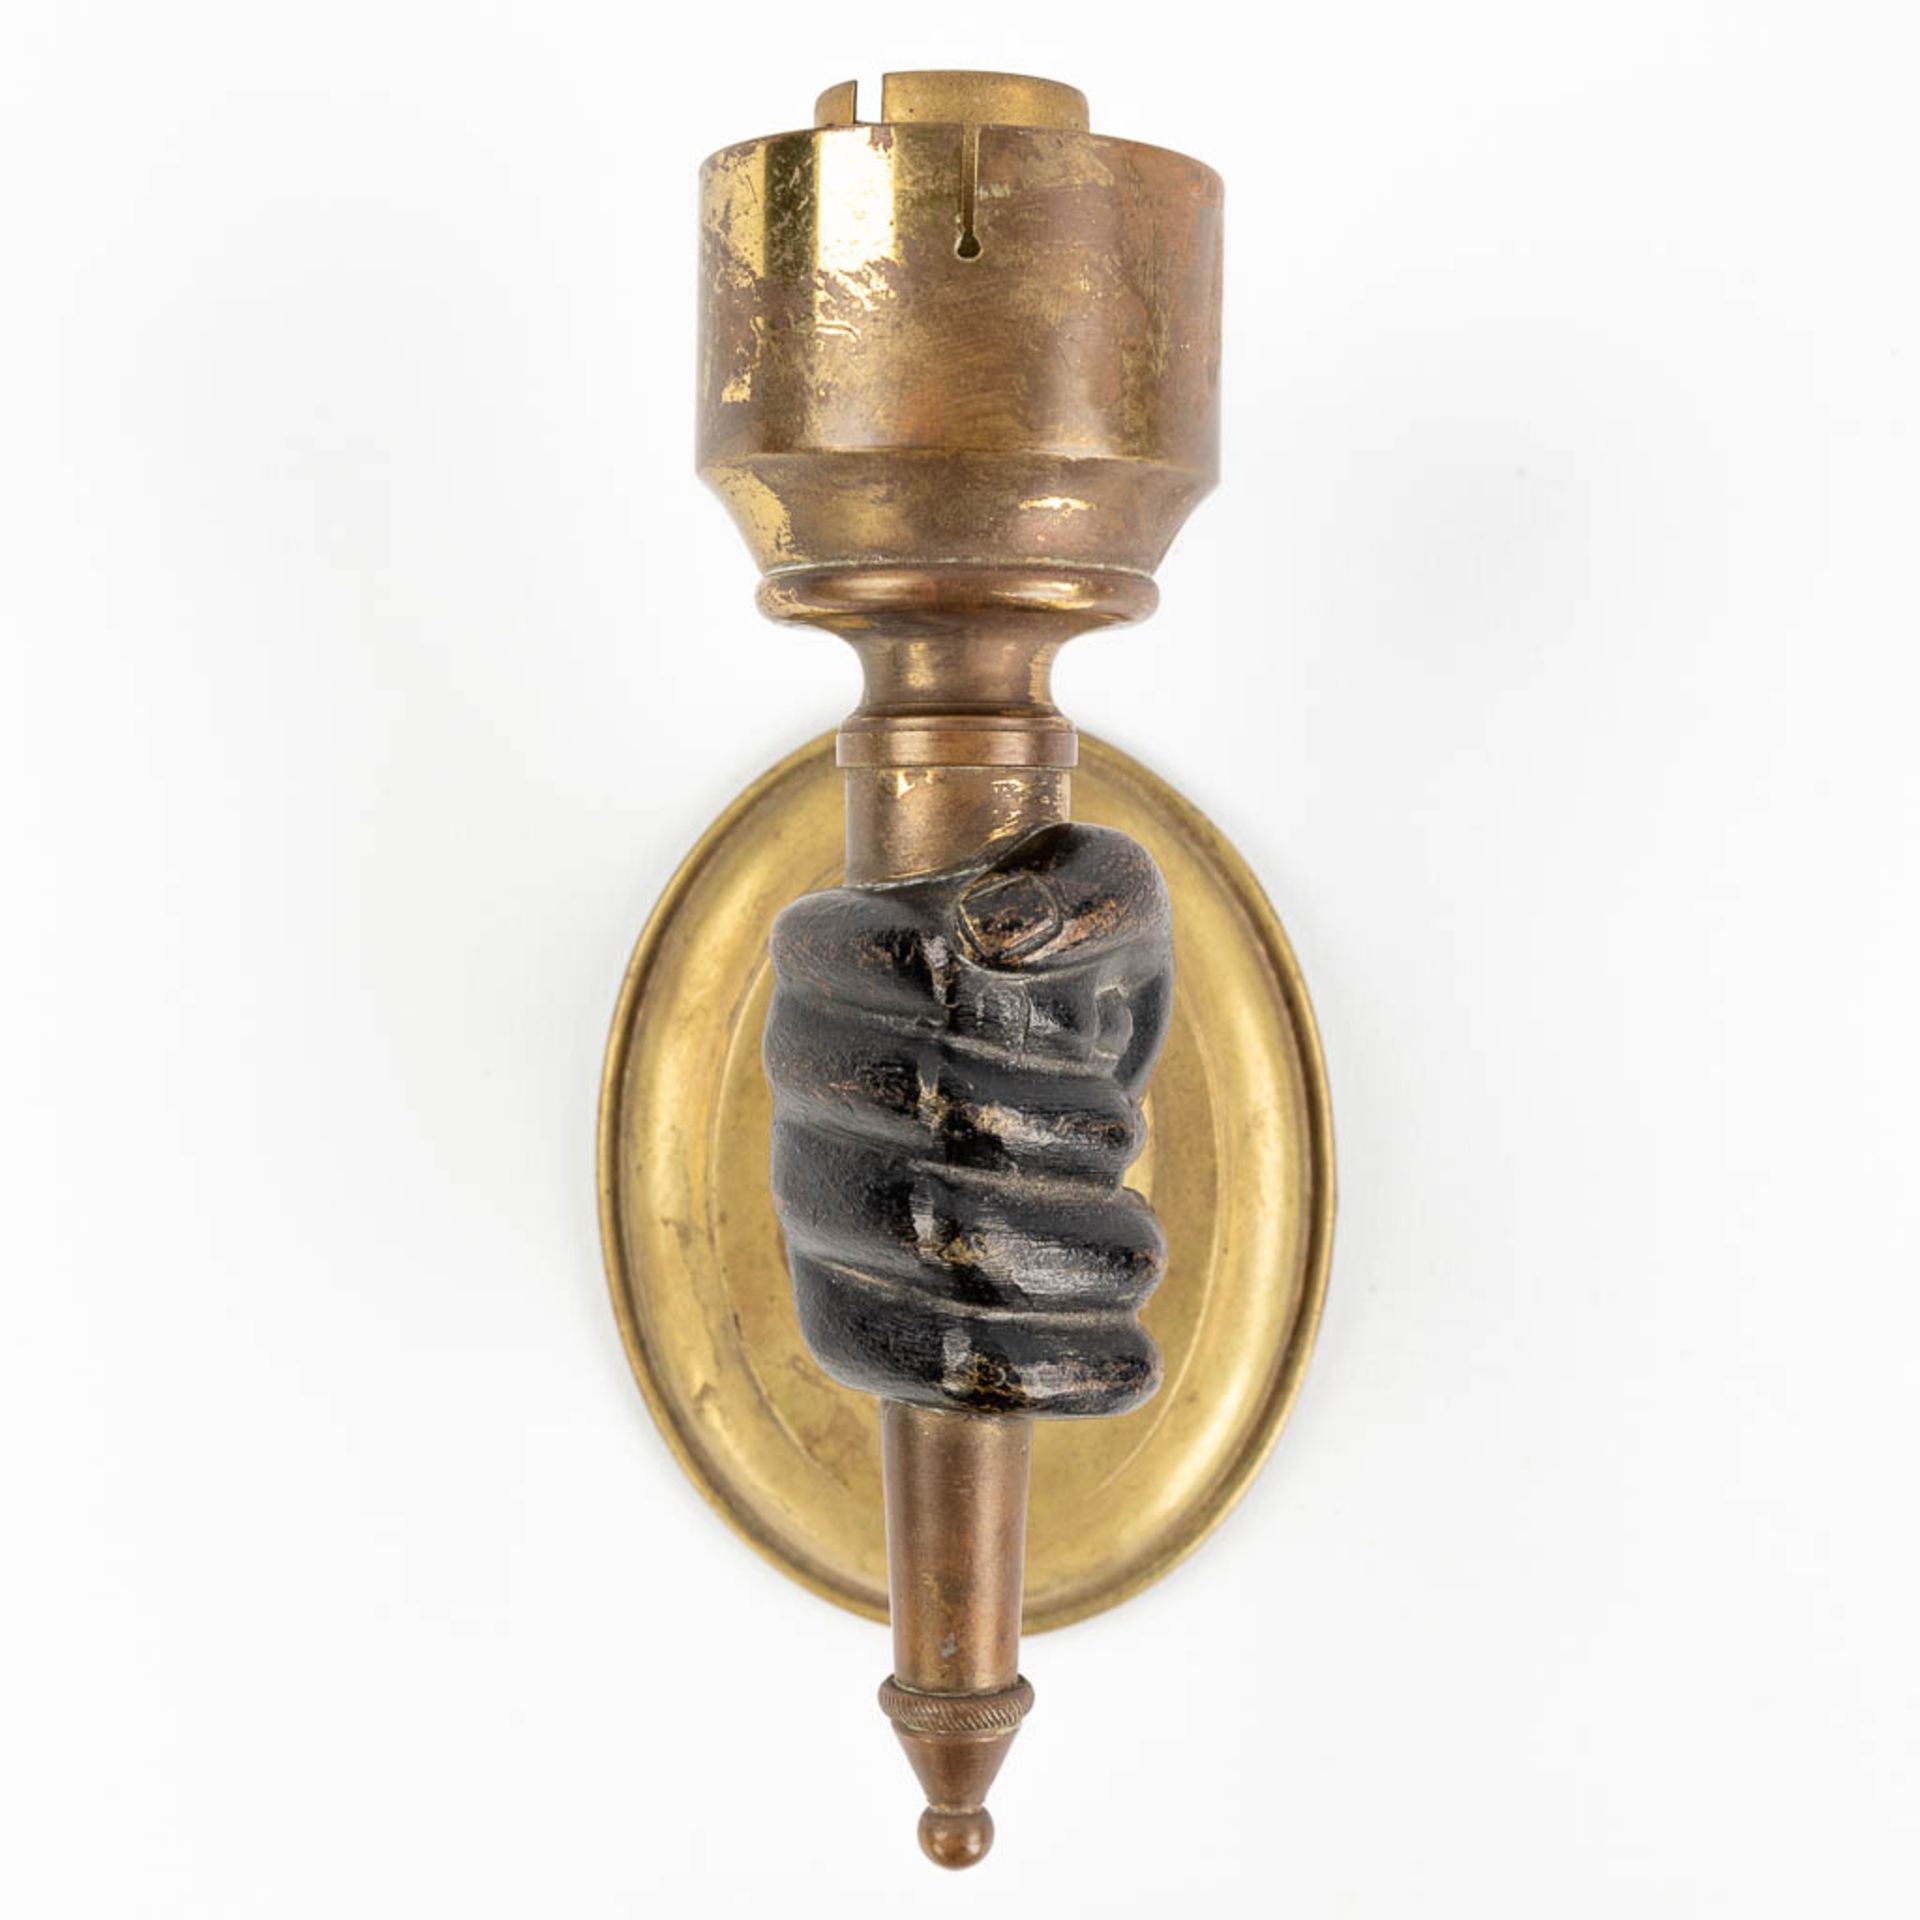 A pair of wall lamps in the shape of a hand with torch, circa 1900. (L:8 x W:7,5 x H:15 cm) - Image 4 of 10